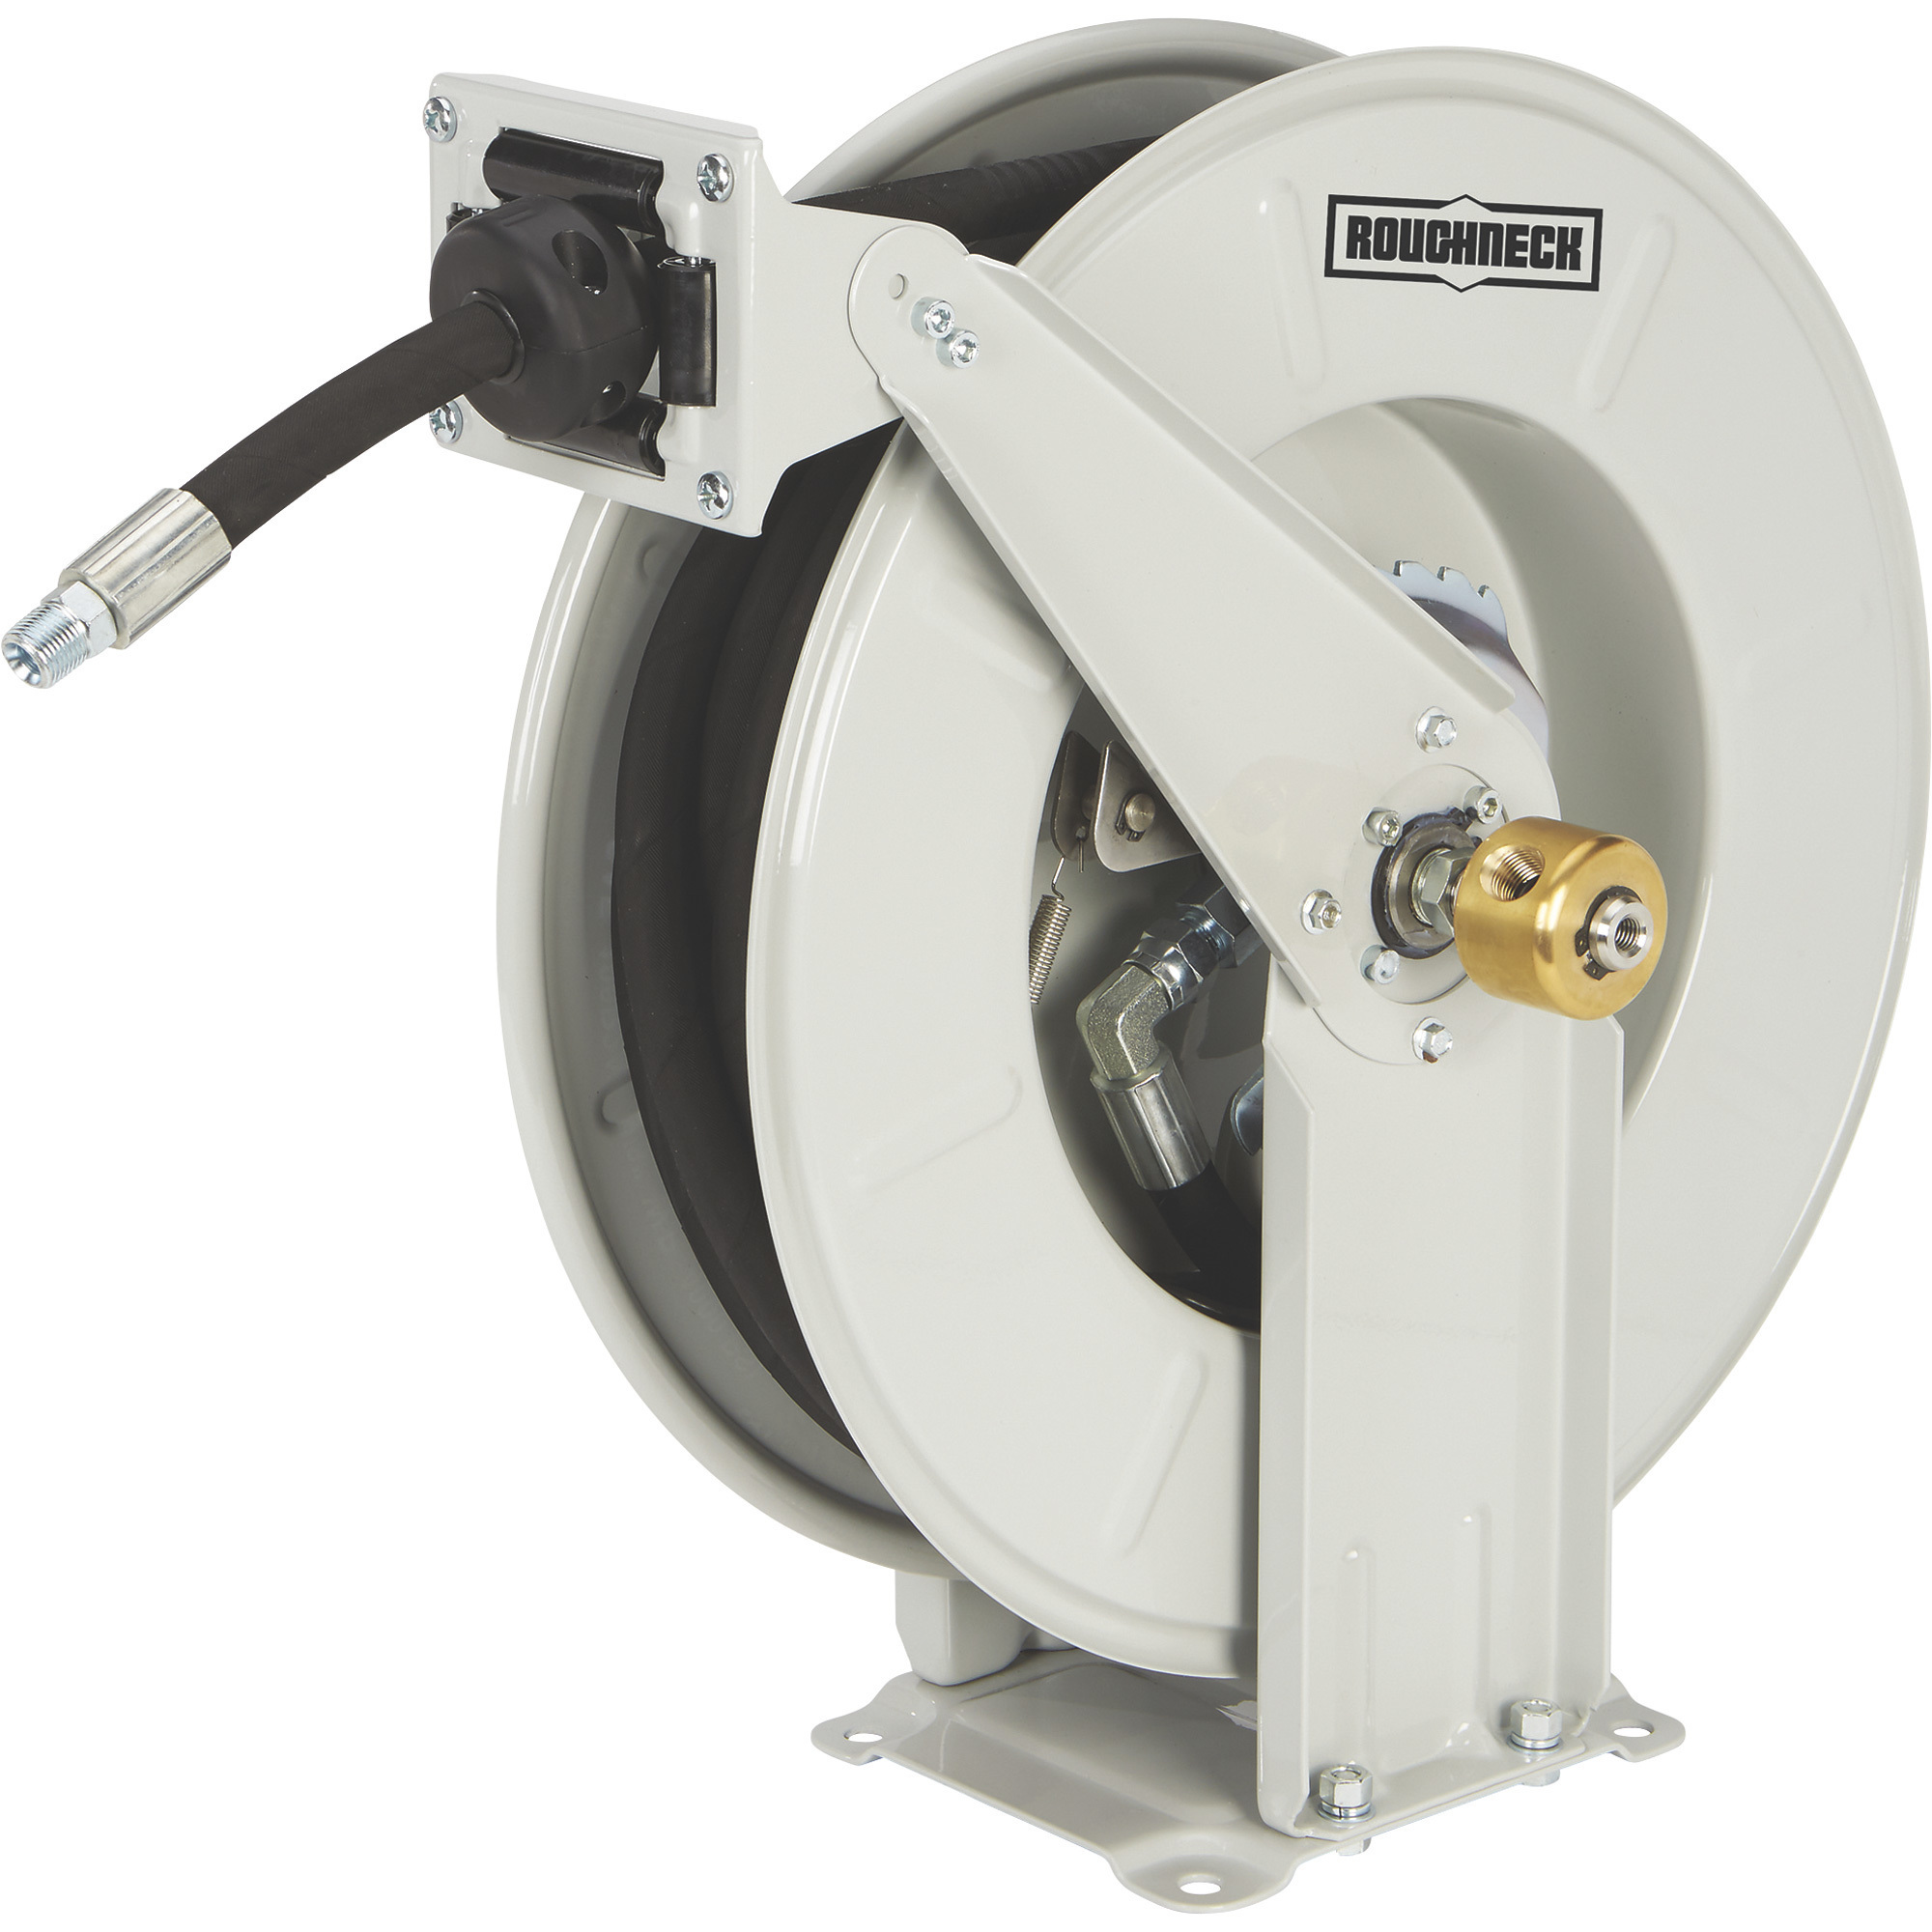 Roughneck Heavy-Duty Grease Hose Reel with 3/8in. x 50ft. Hose